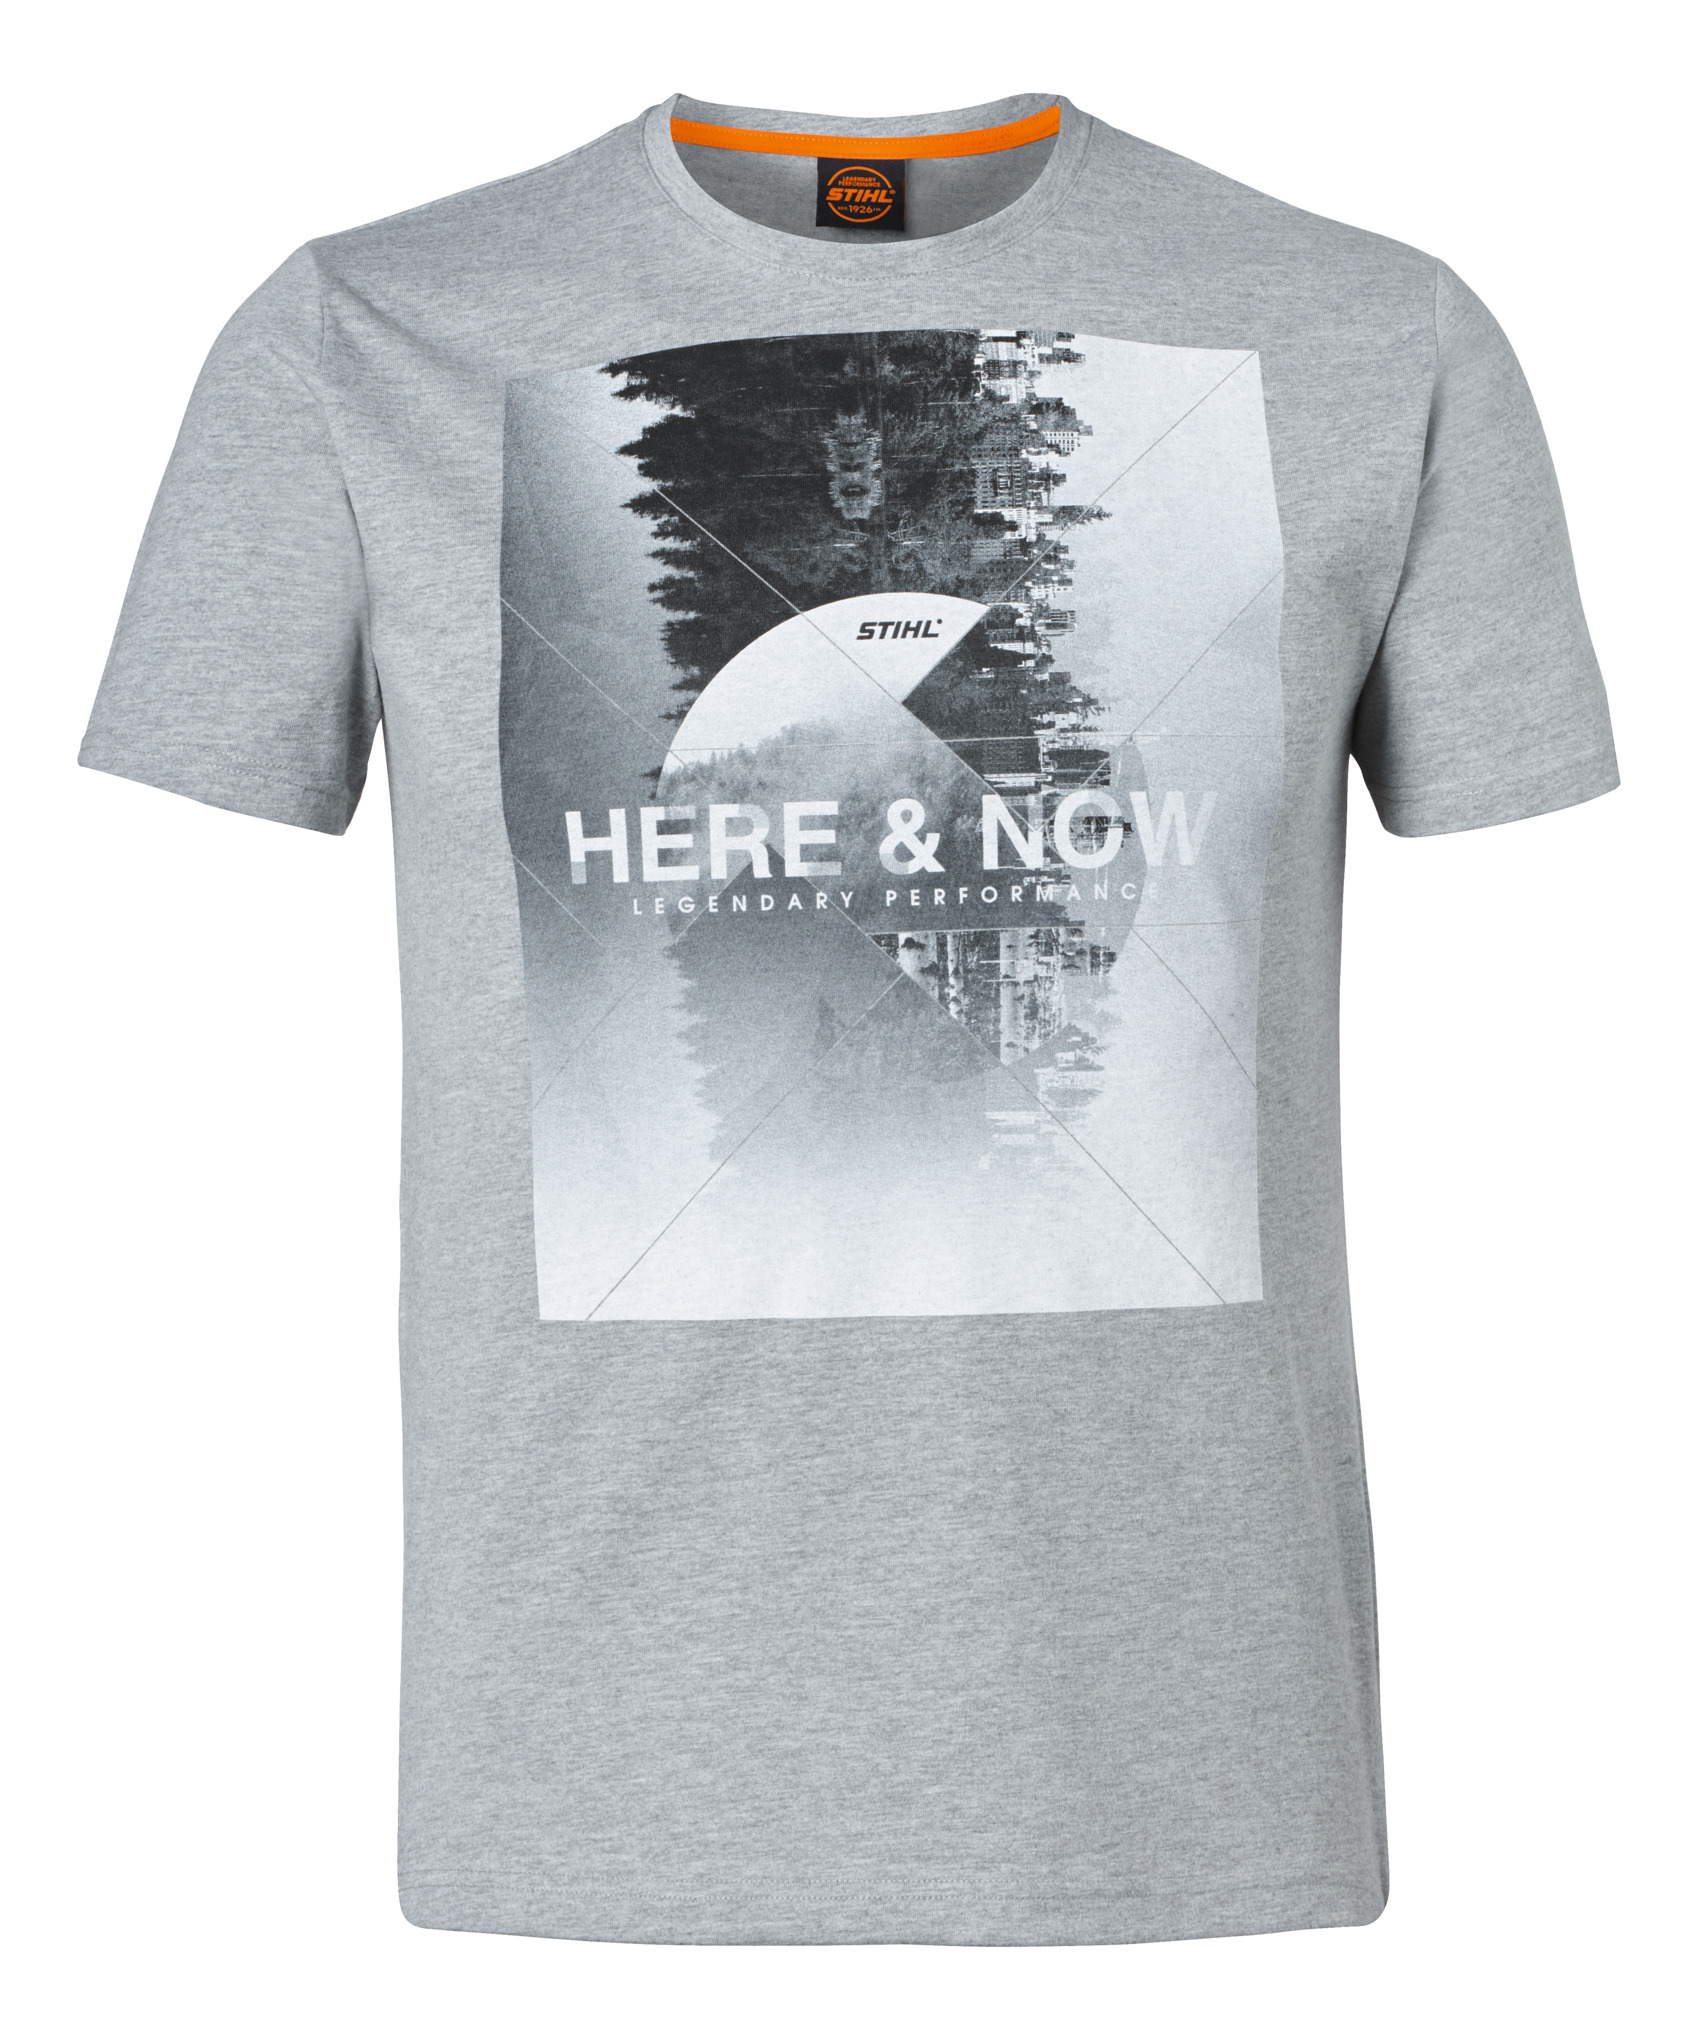 "HERE & NOW" t-shirt